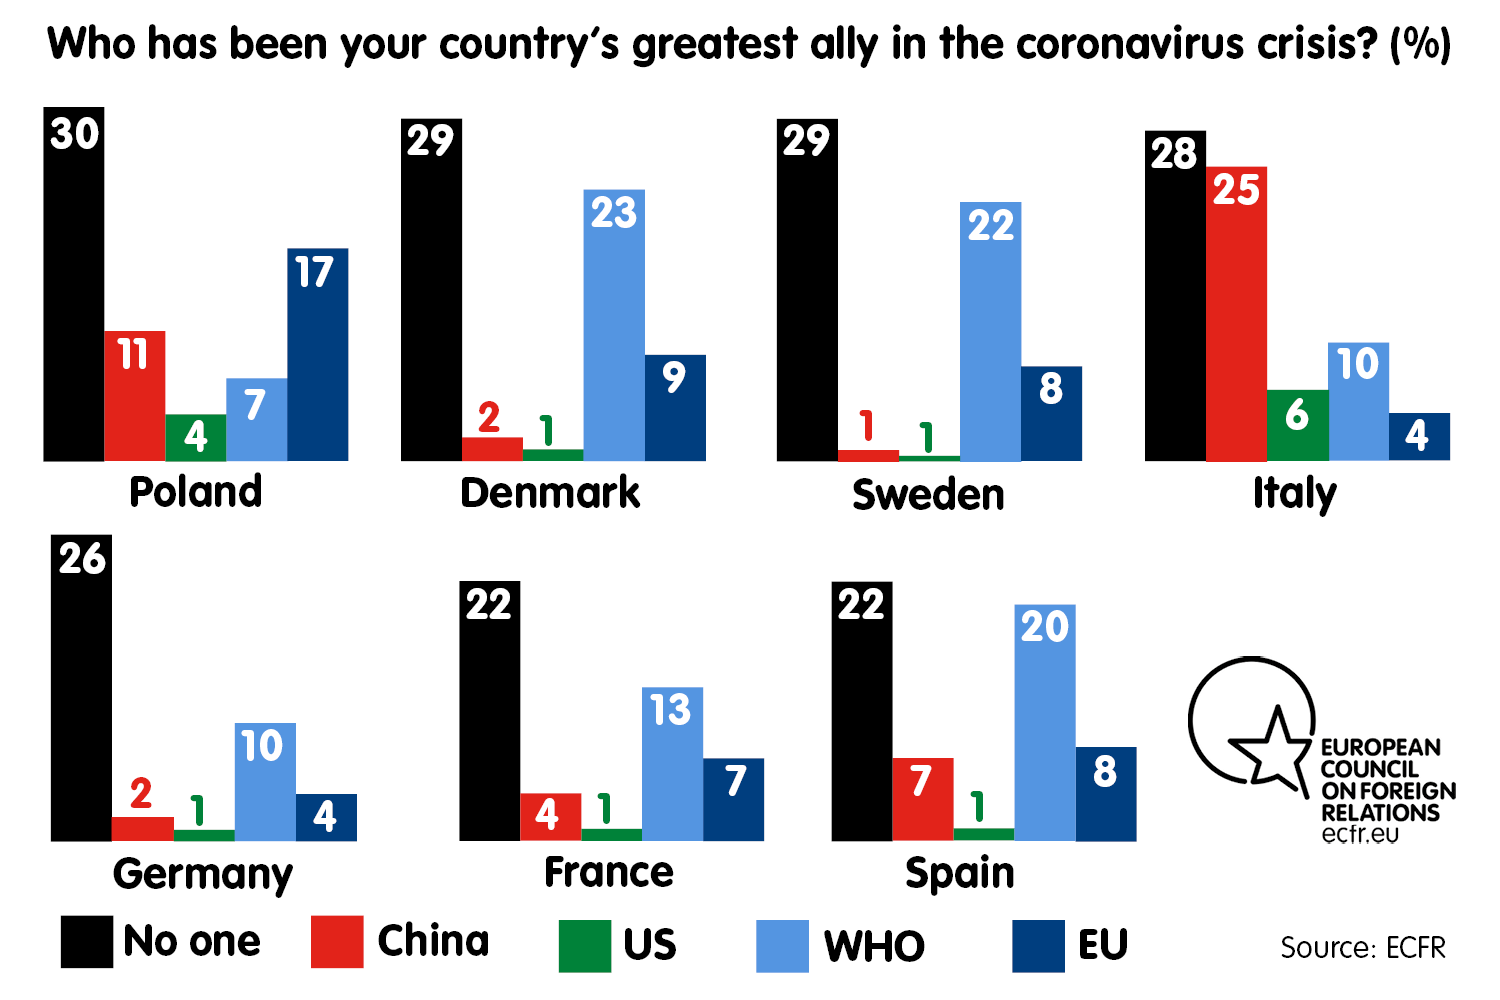 Who has been your country's greatest ally in the coronavirus crisis?